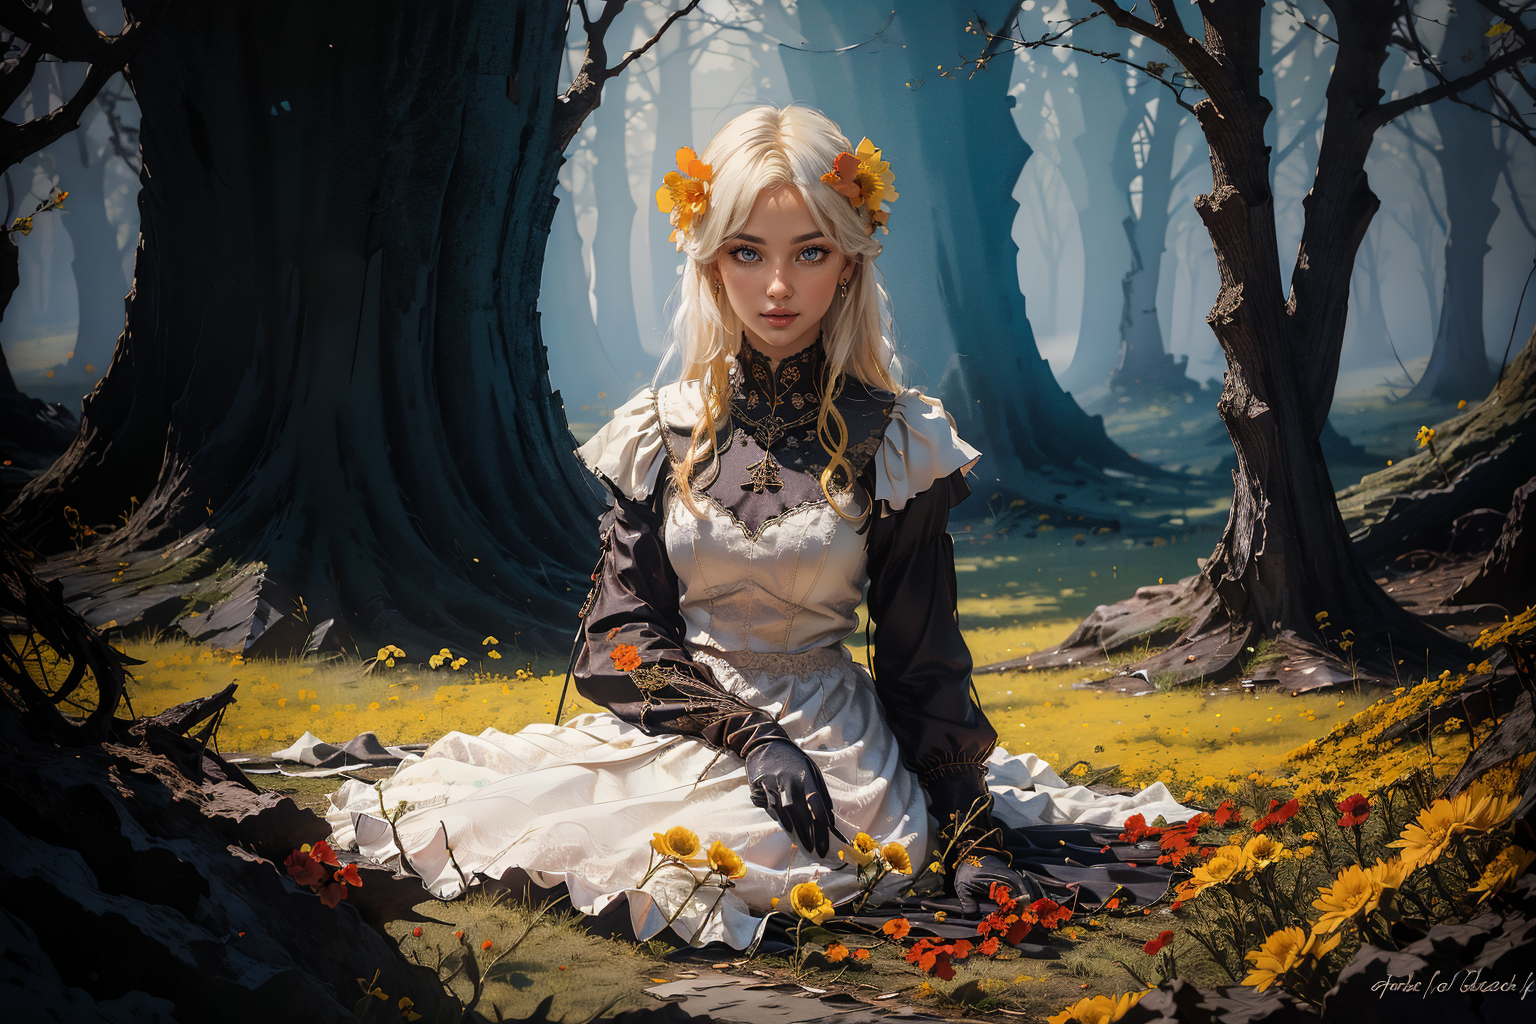 General 1536x1024 AI art digital art white dress blonde forest fantasy painting fantasy princess gloves women indoors trees looking at viewer wood flower in hair long hair long sleeves on the ground grass flowers dress juicy lips parted lips natural light sunlight women